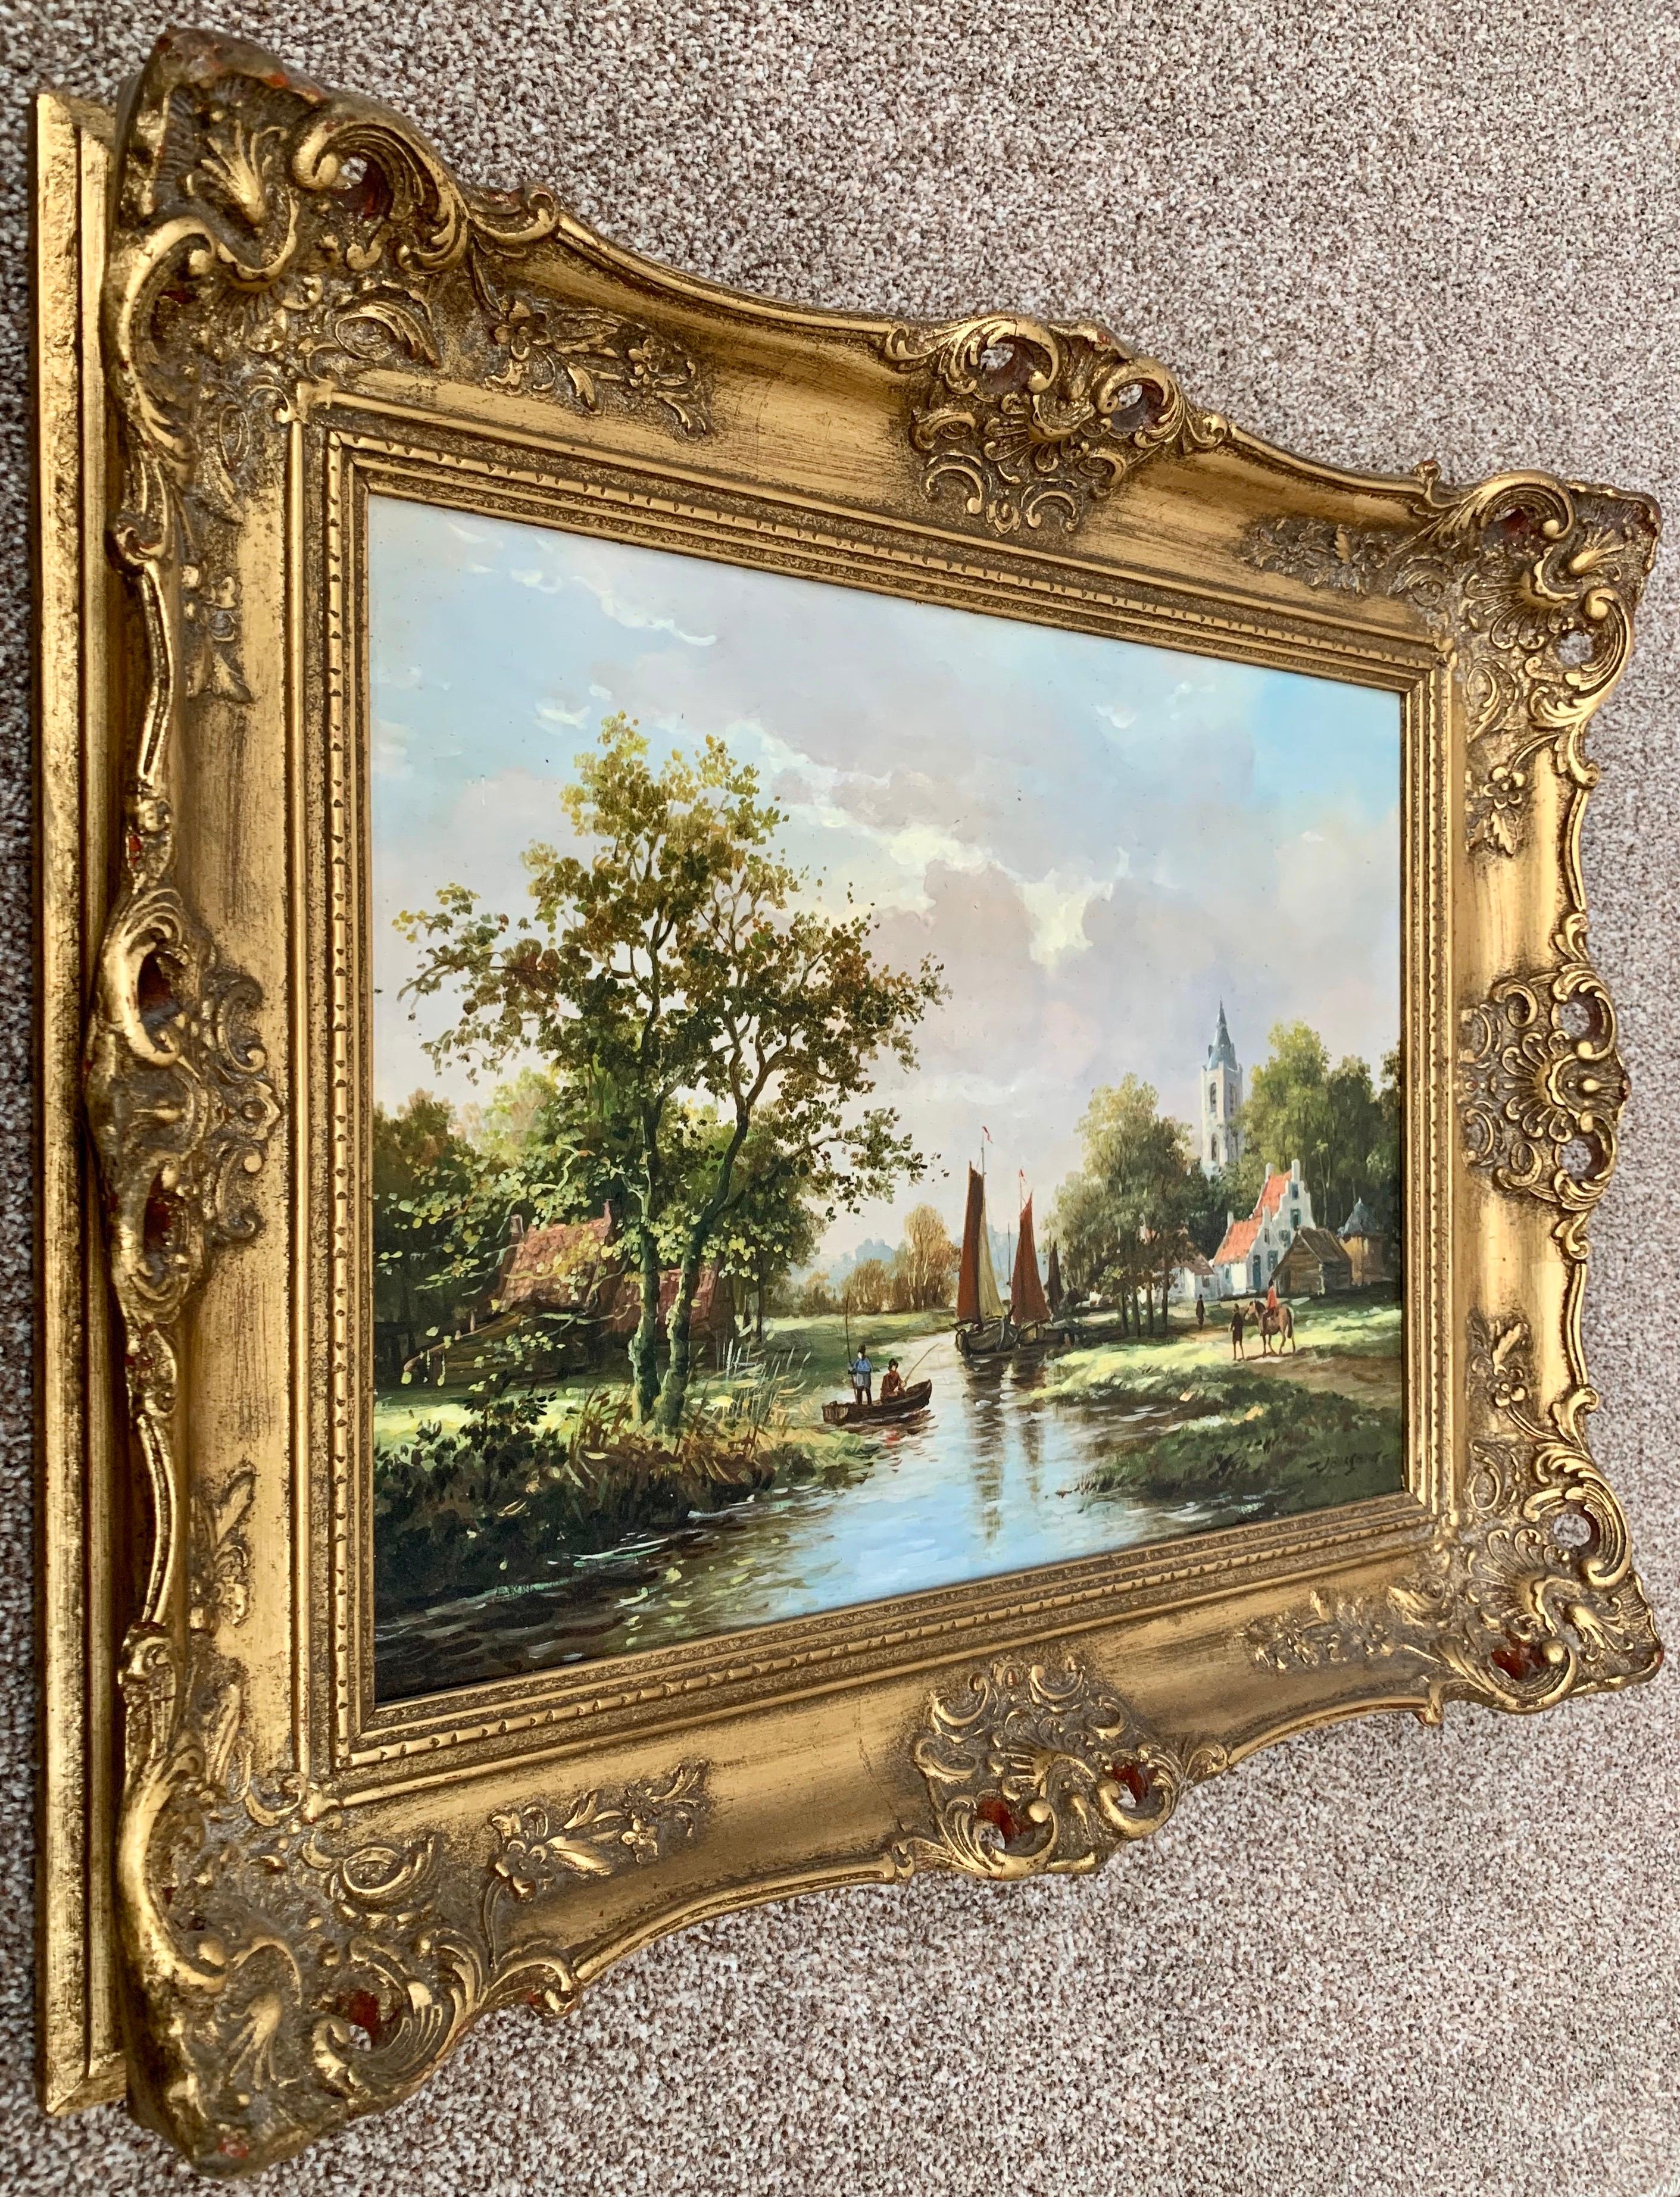 Classical Traditional 20th Century River Landscape Oil Painting by Dutch Painter. A village scene with church, horses, trees, figures and boats against the background of a beautiful summer sky.

Art measures 15.5 x 11.5 inches
Frame measures 21.5 x